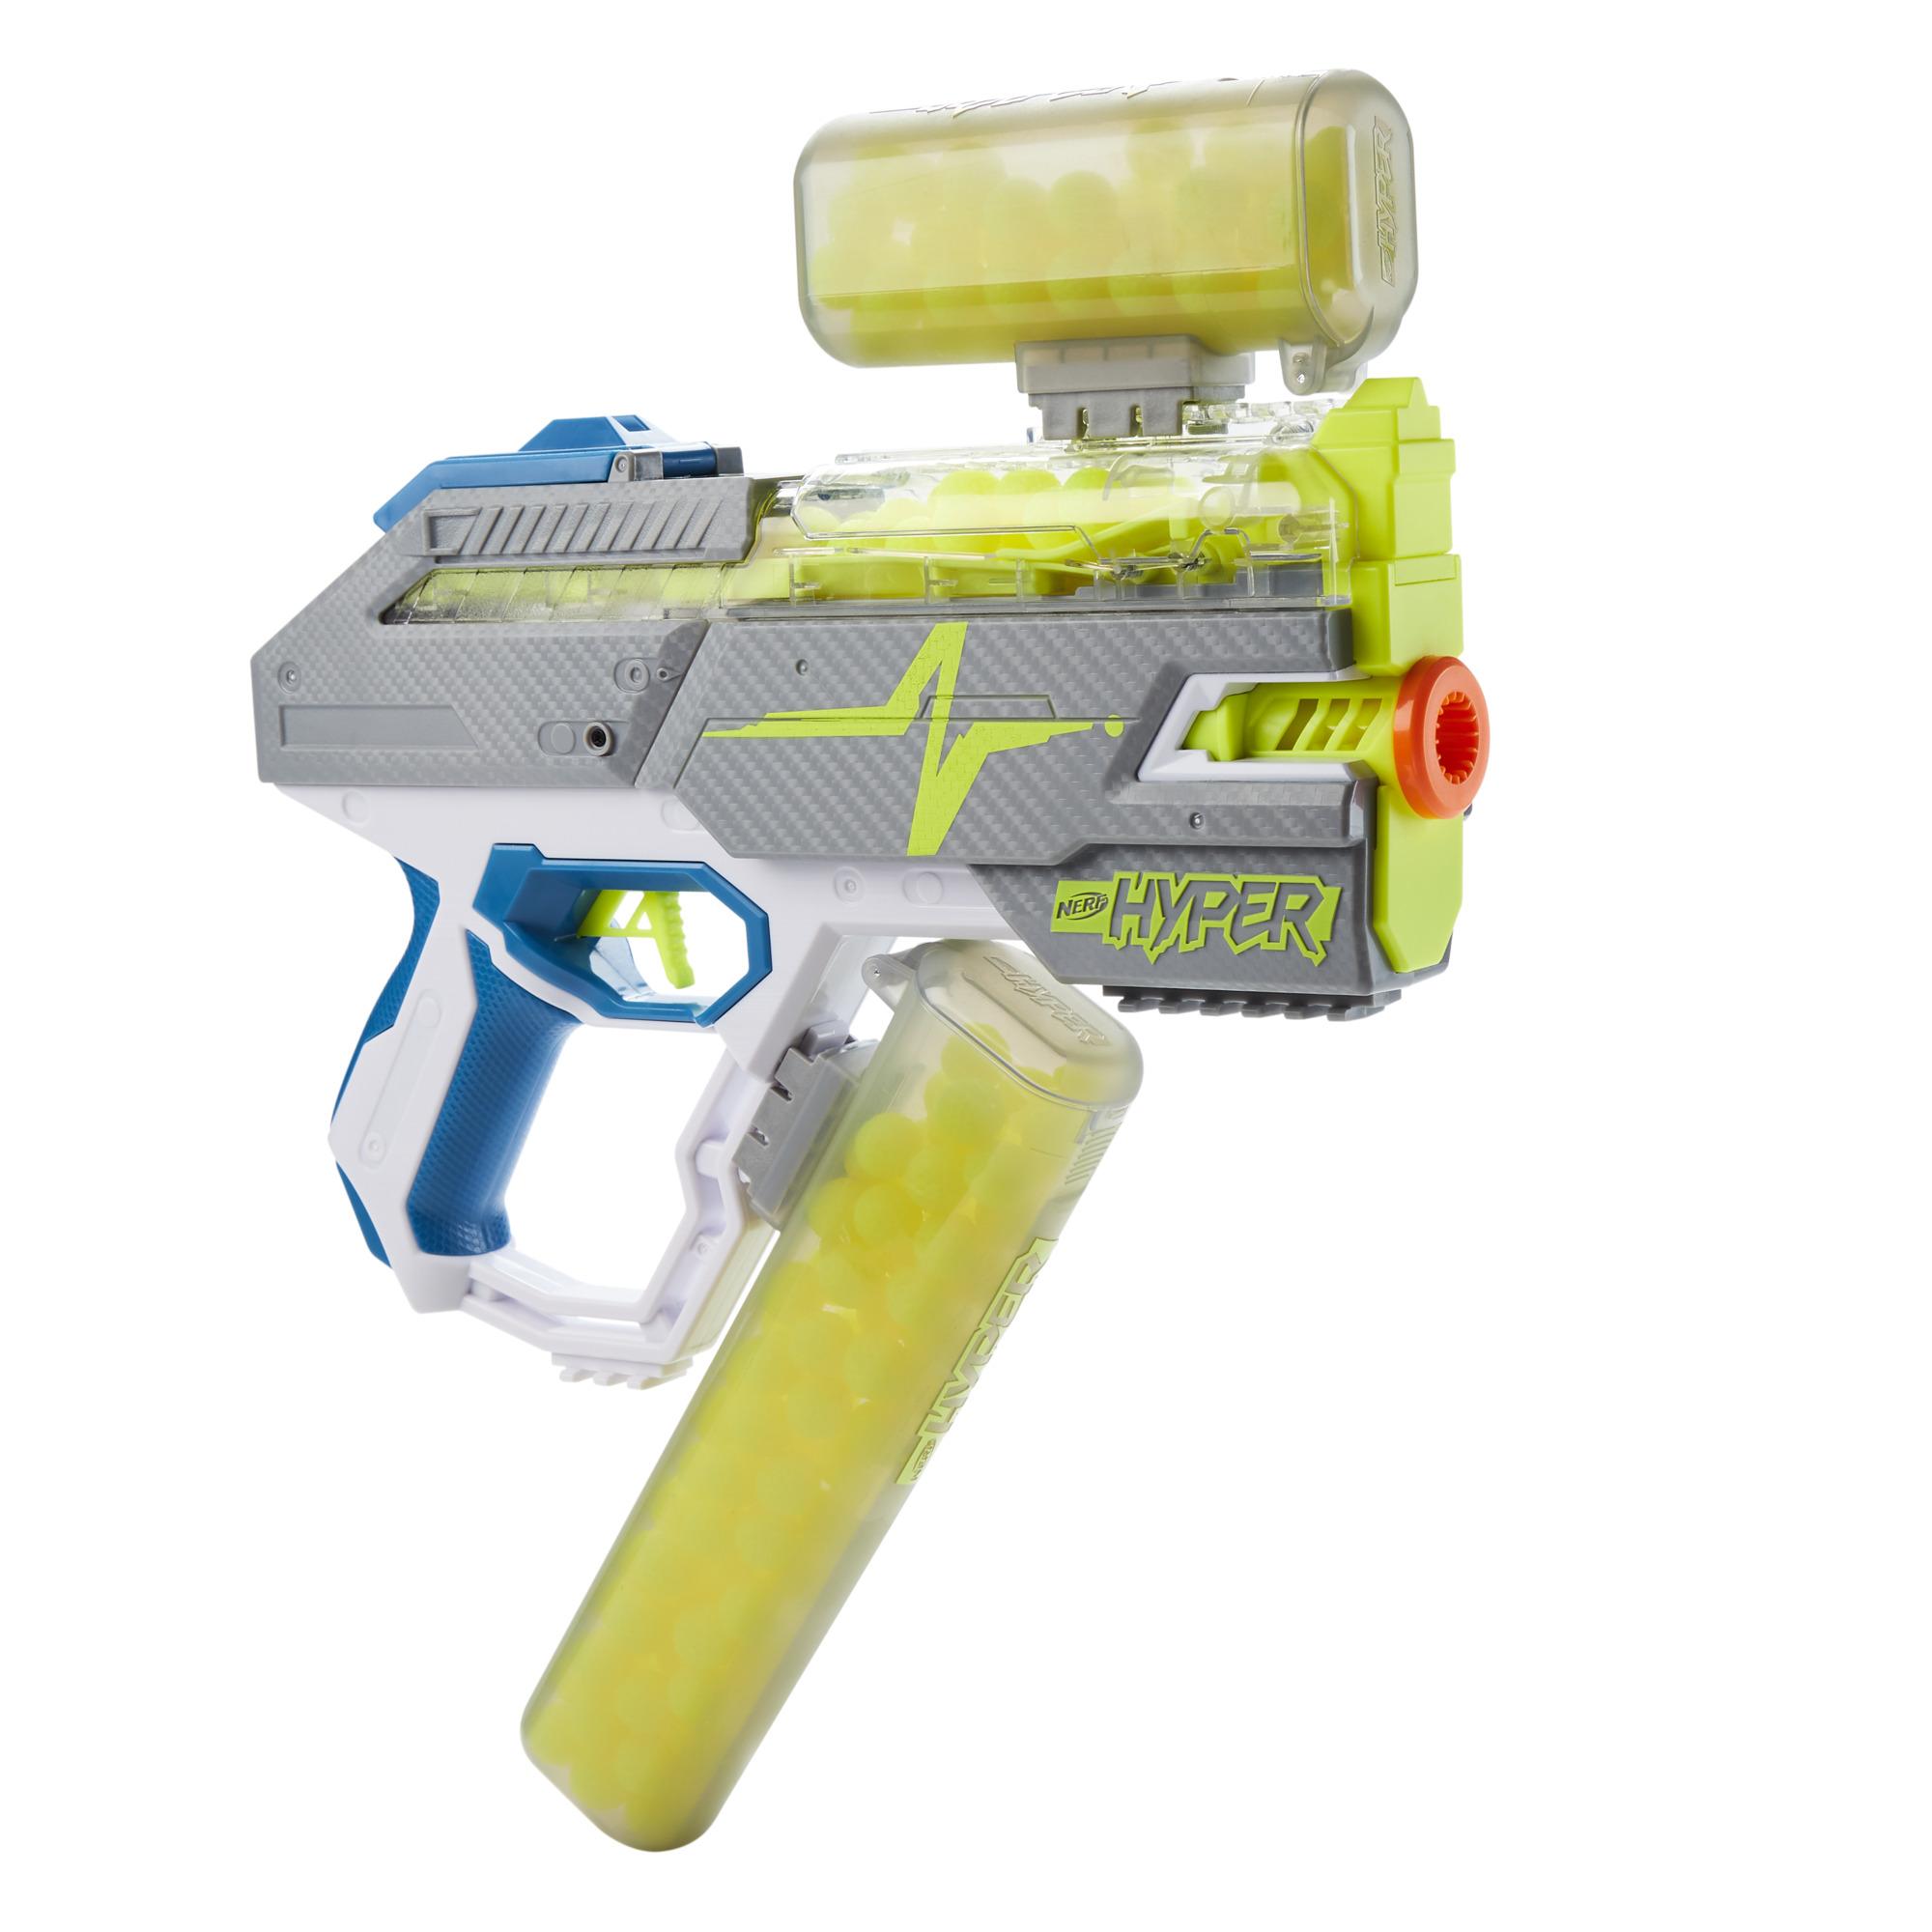 Nerf Hyper Rush-40 Pump-Action Blaster and 30 Nerf Hyper Rounds, 110 FPS Velocity, Easy Reload, 40-Round Capacity